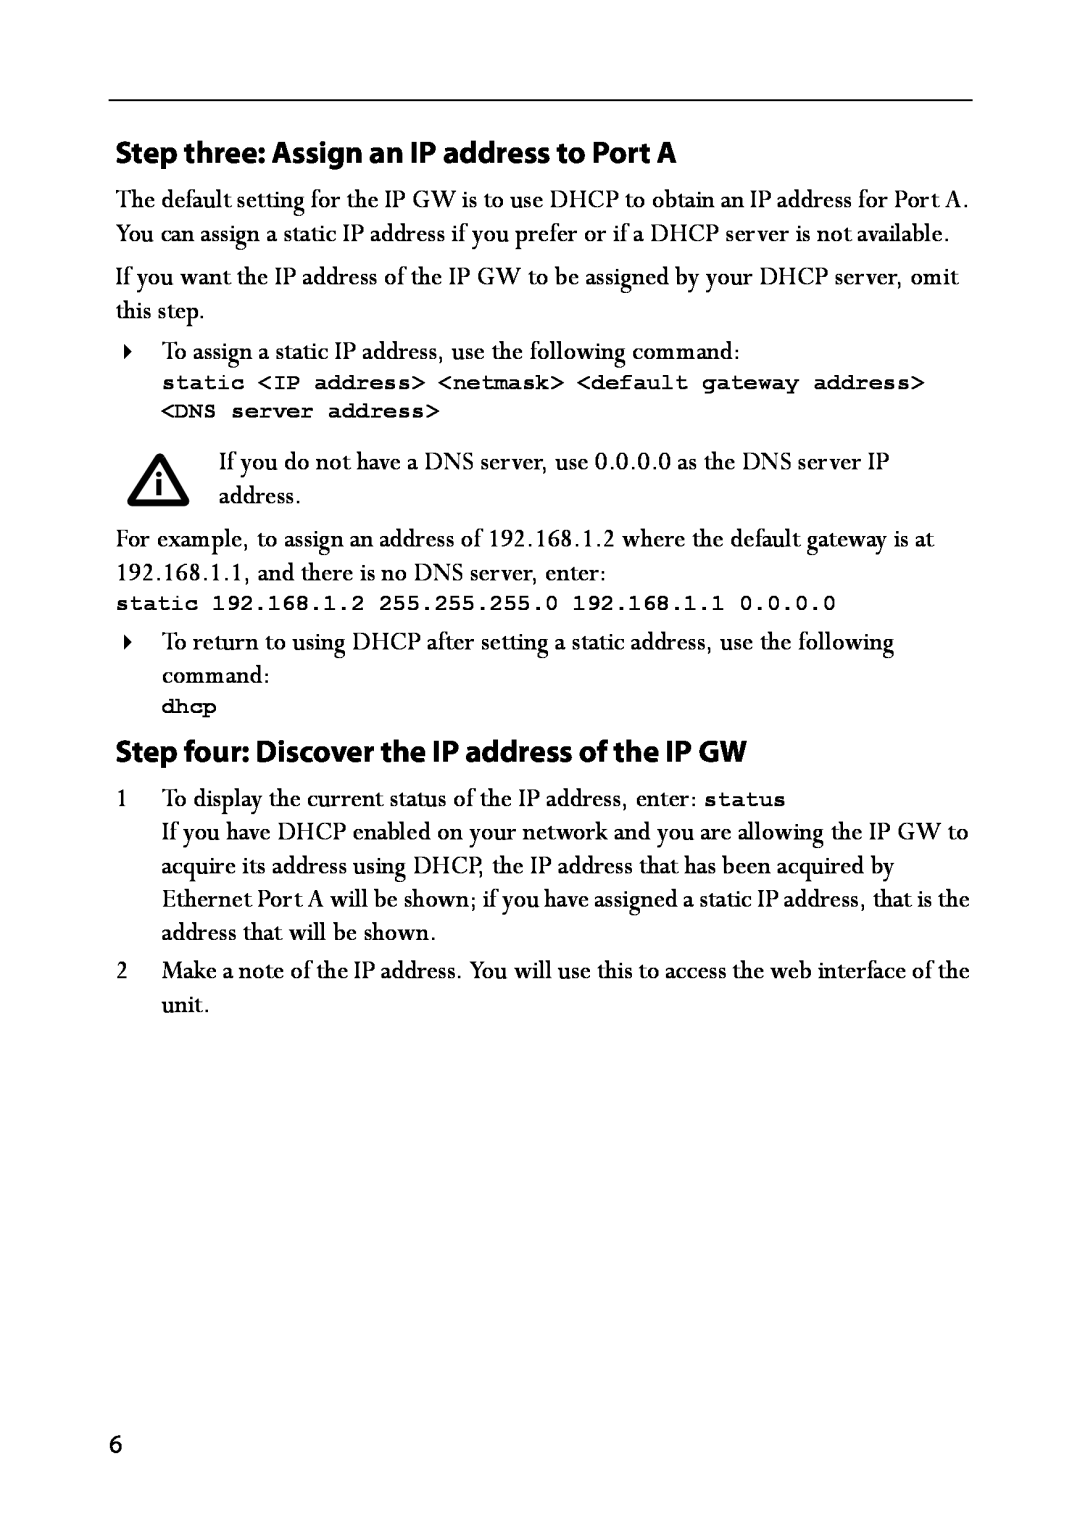 TANDBERG IP GW 3500 manual Step three Assign an IP address to Port A, Step four Discover the IP address of the IP GW 